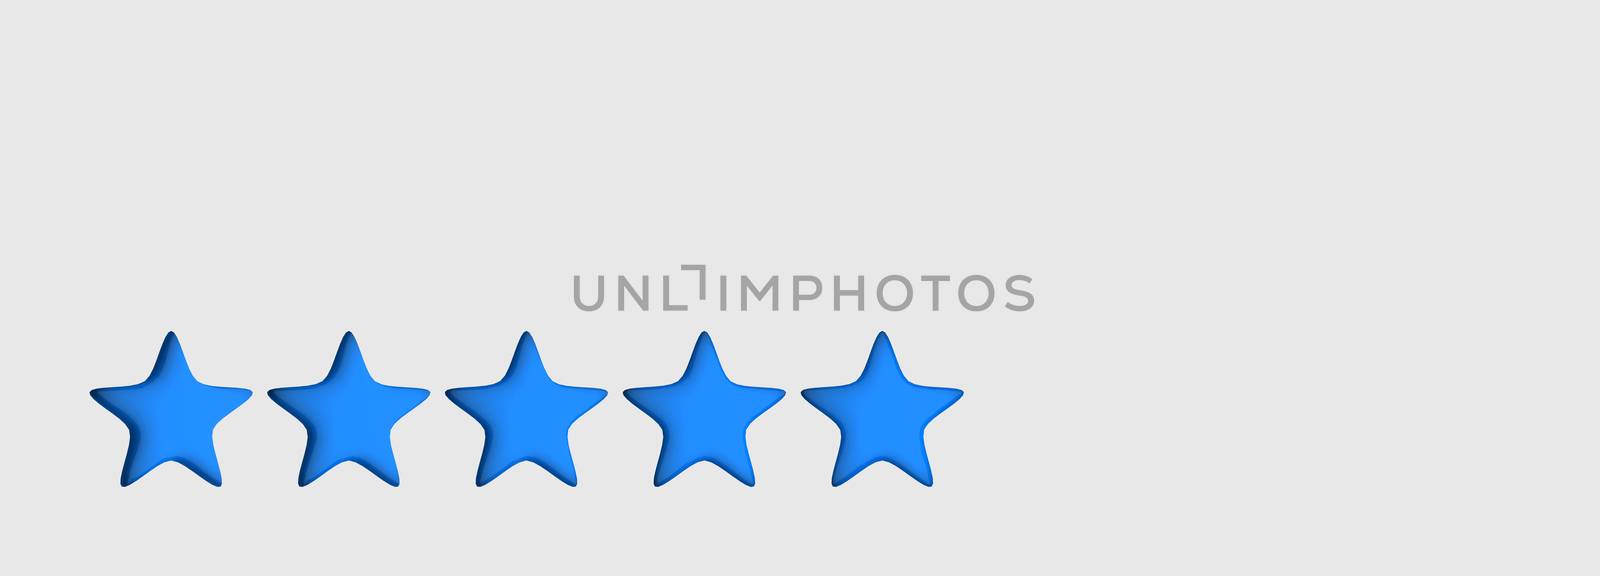 3d five blue star on color background. Render and illustration of golden star for premium reviews by Andreajk3